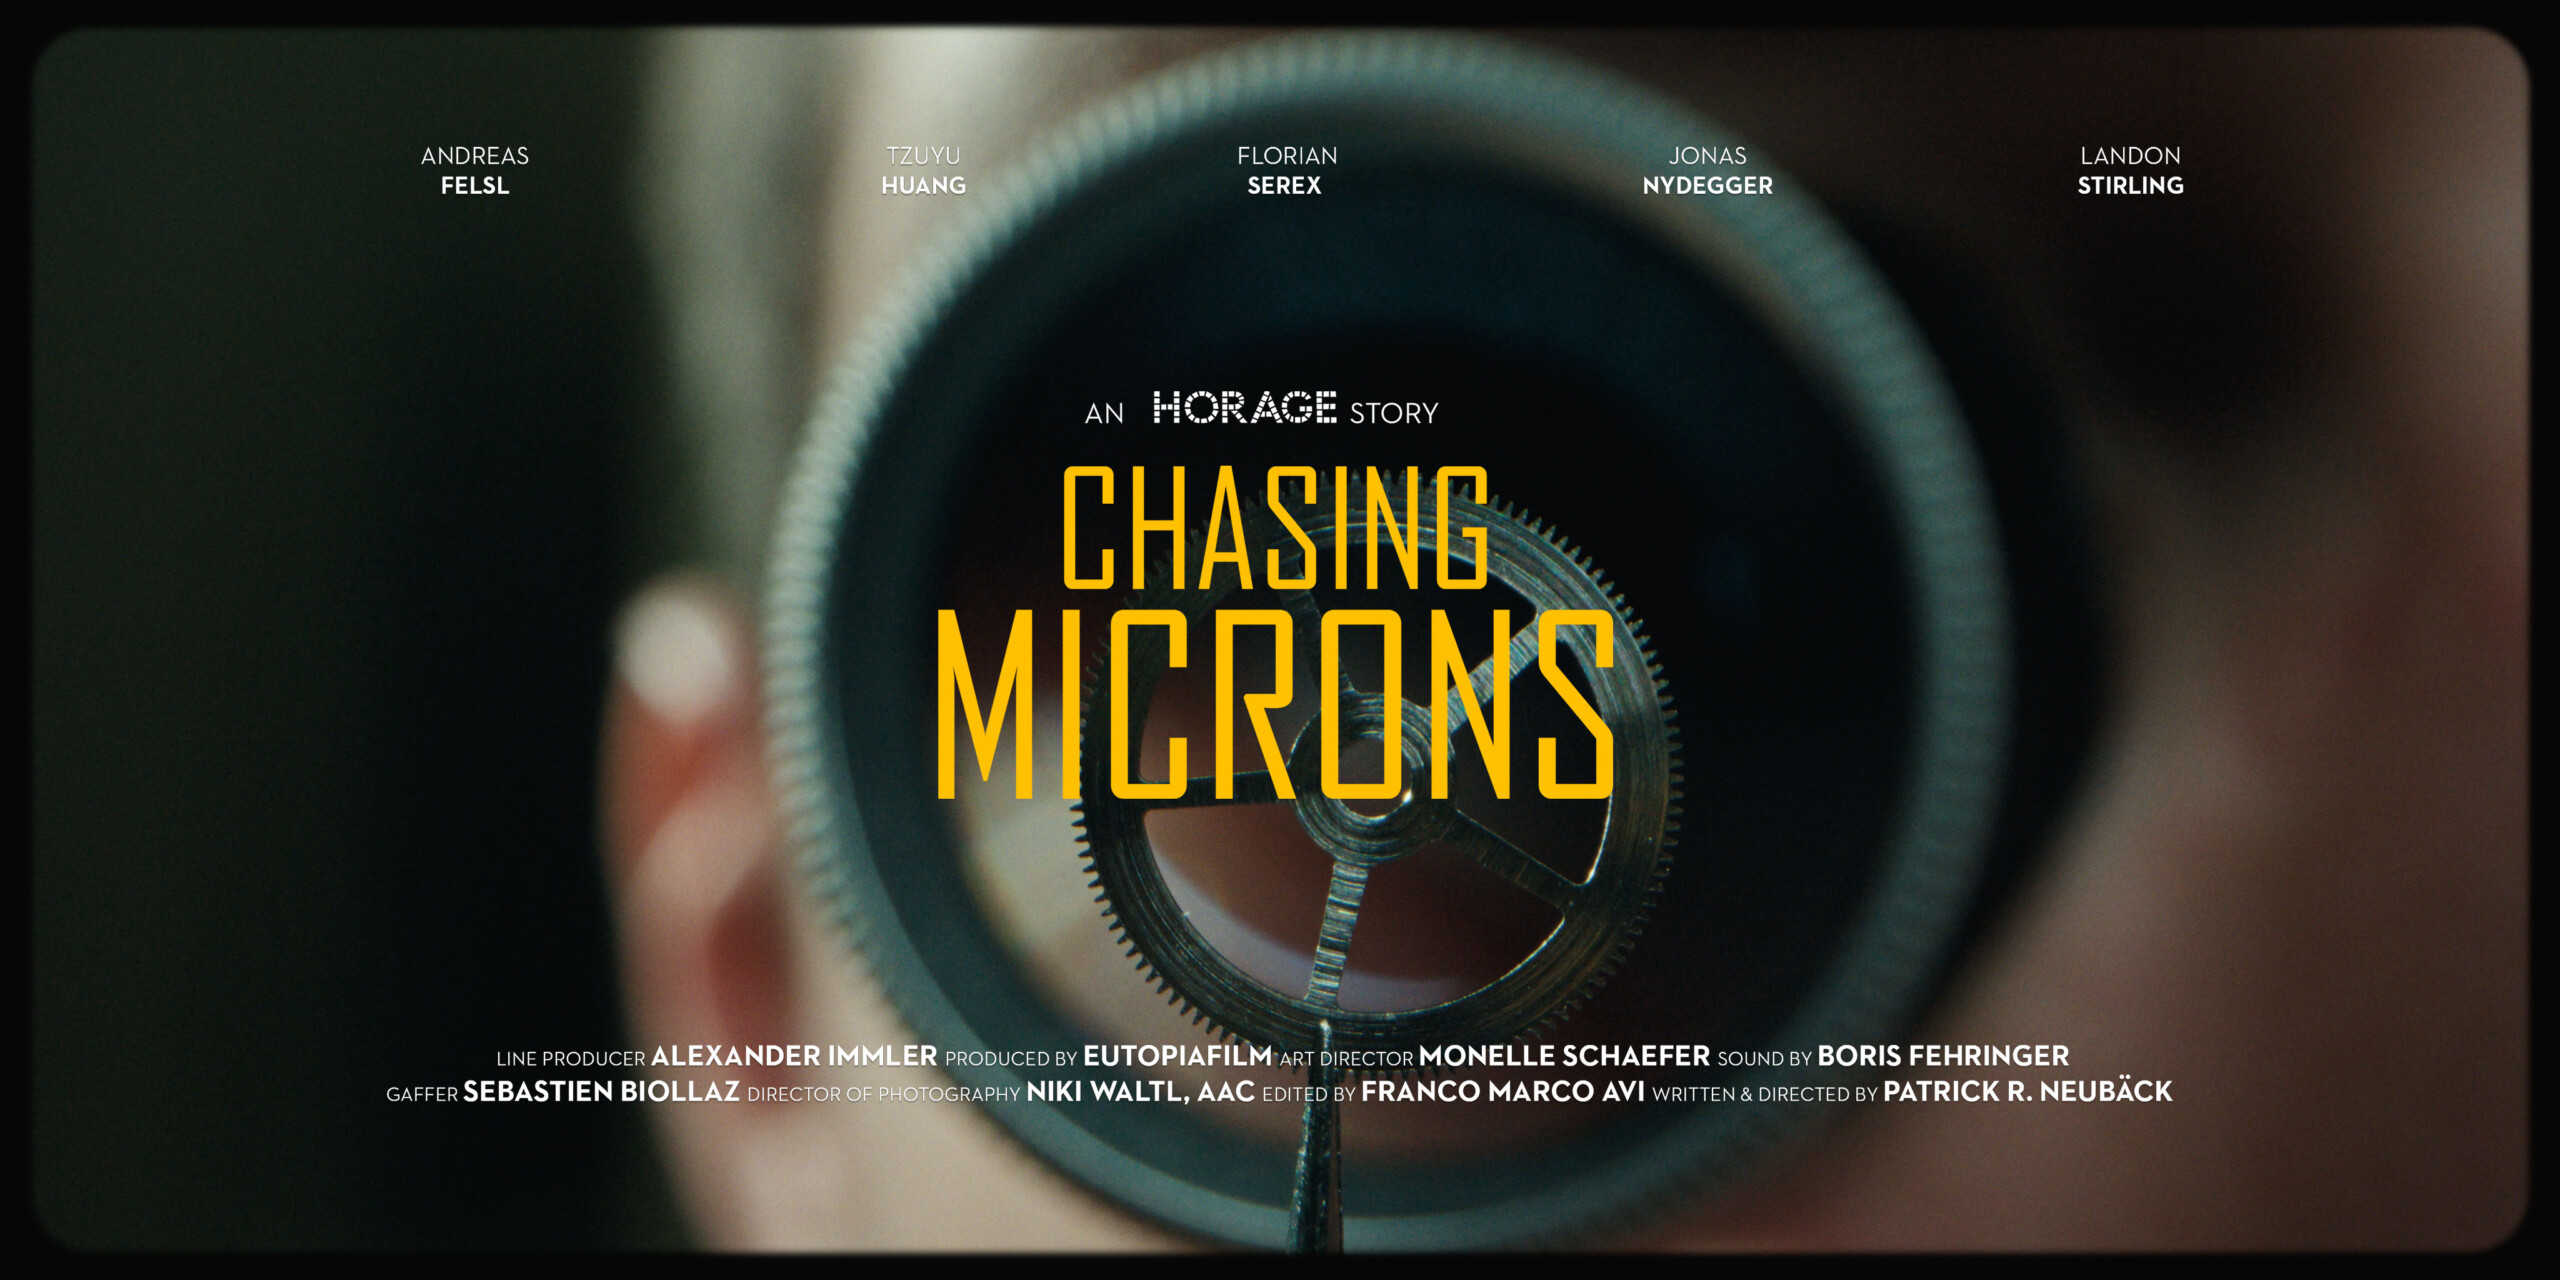 Watch the Global Release of Chasing Microns from Horage - Worn & Wound